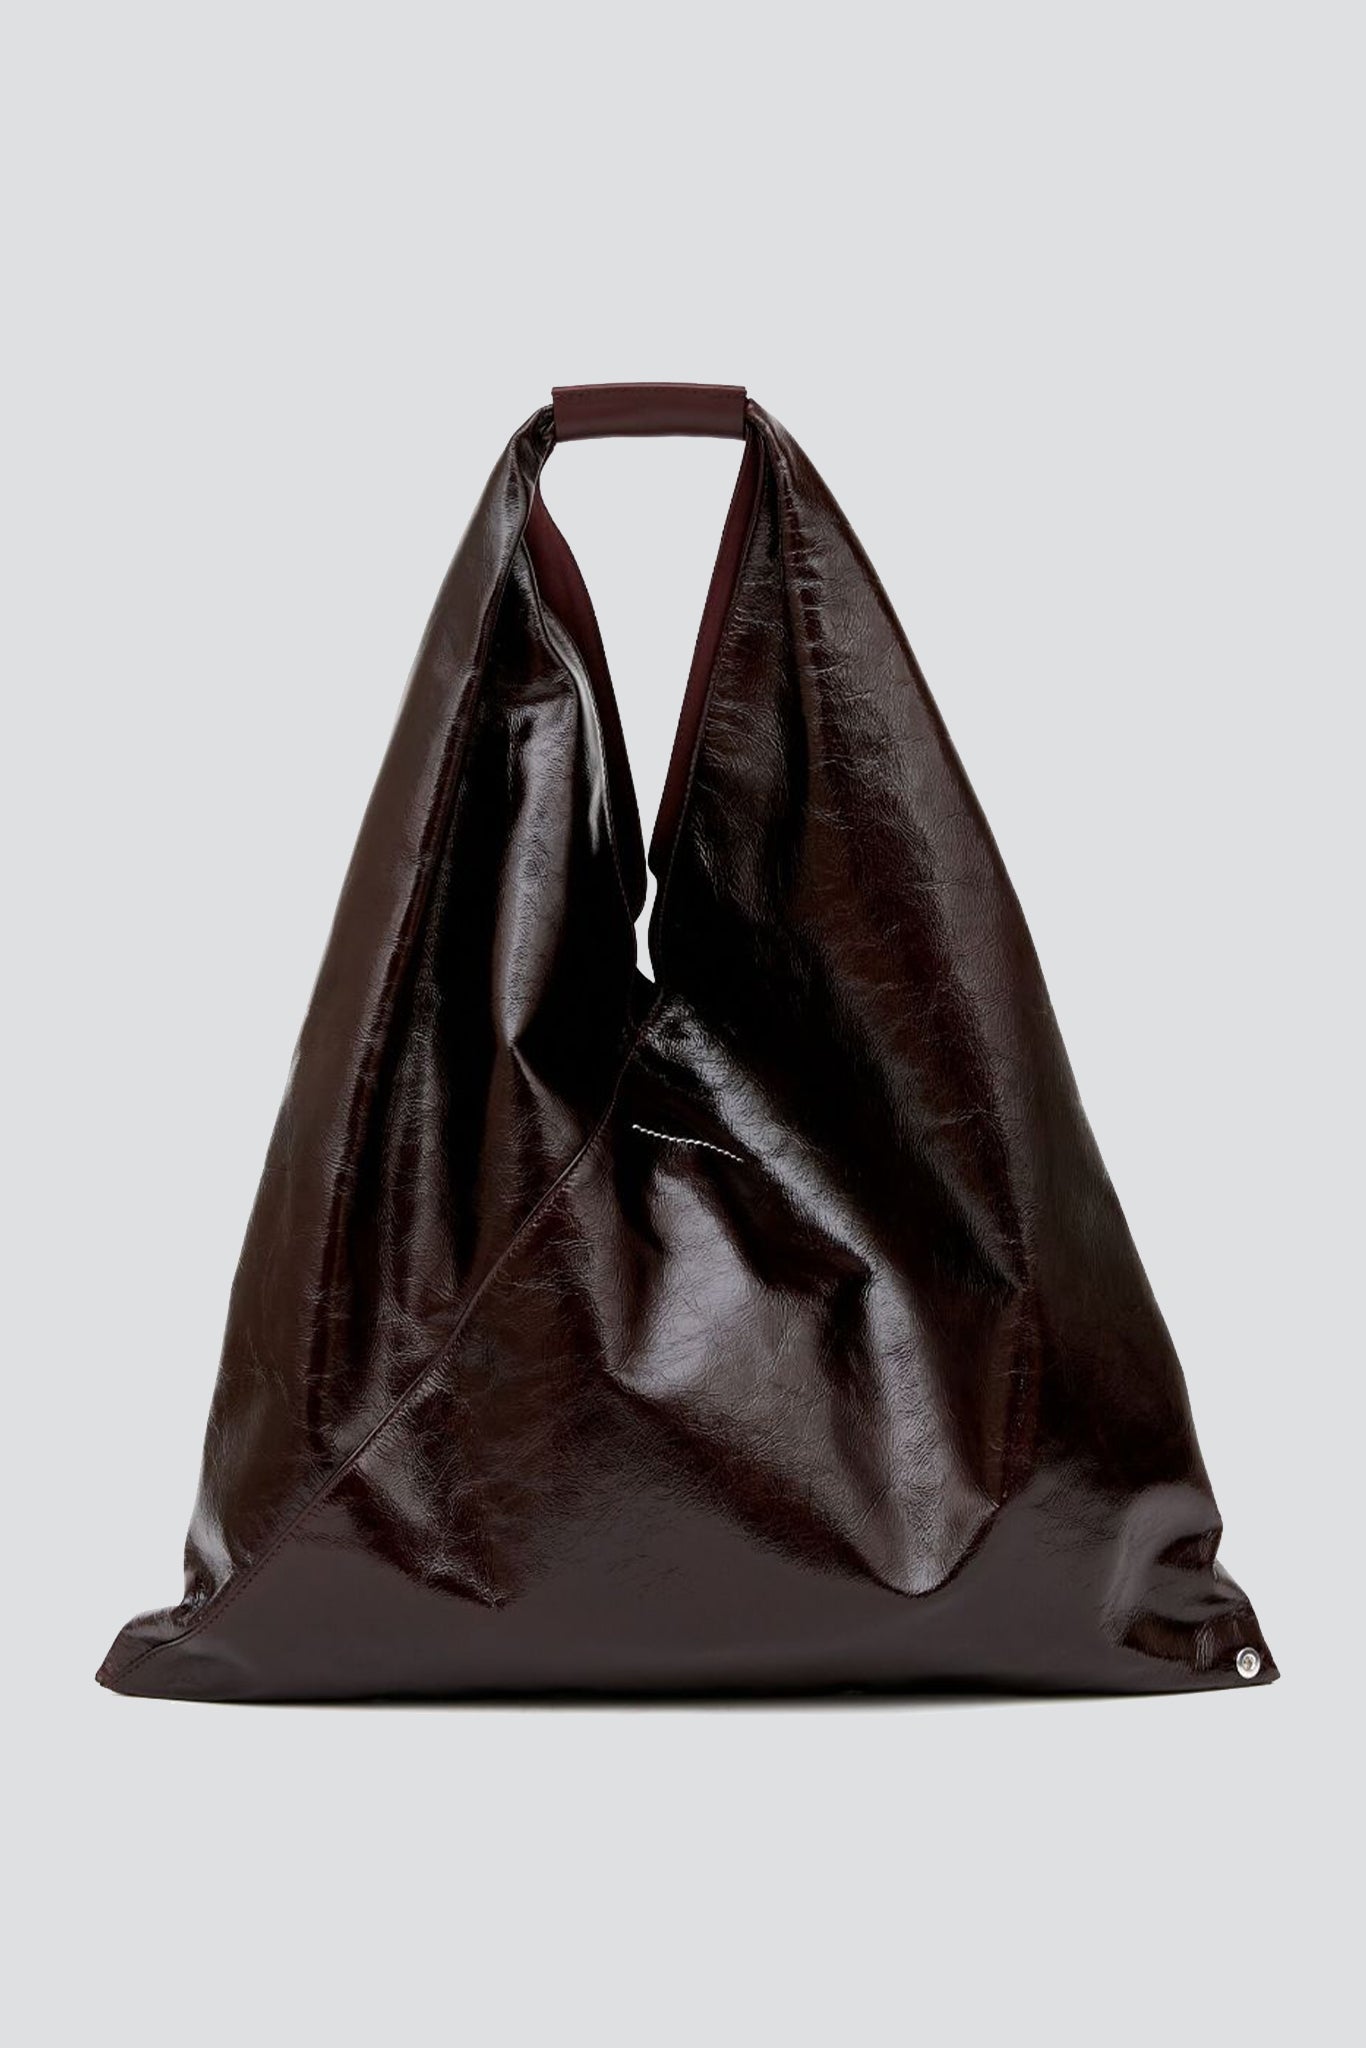 Brown Patent Leather Japanese Bag